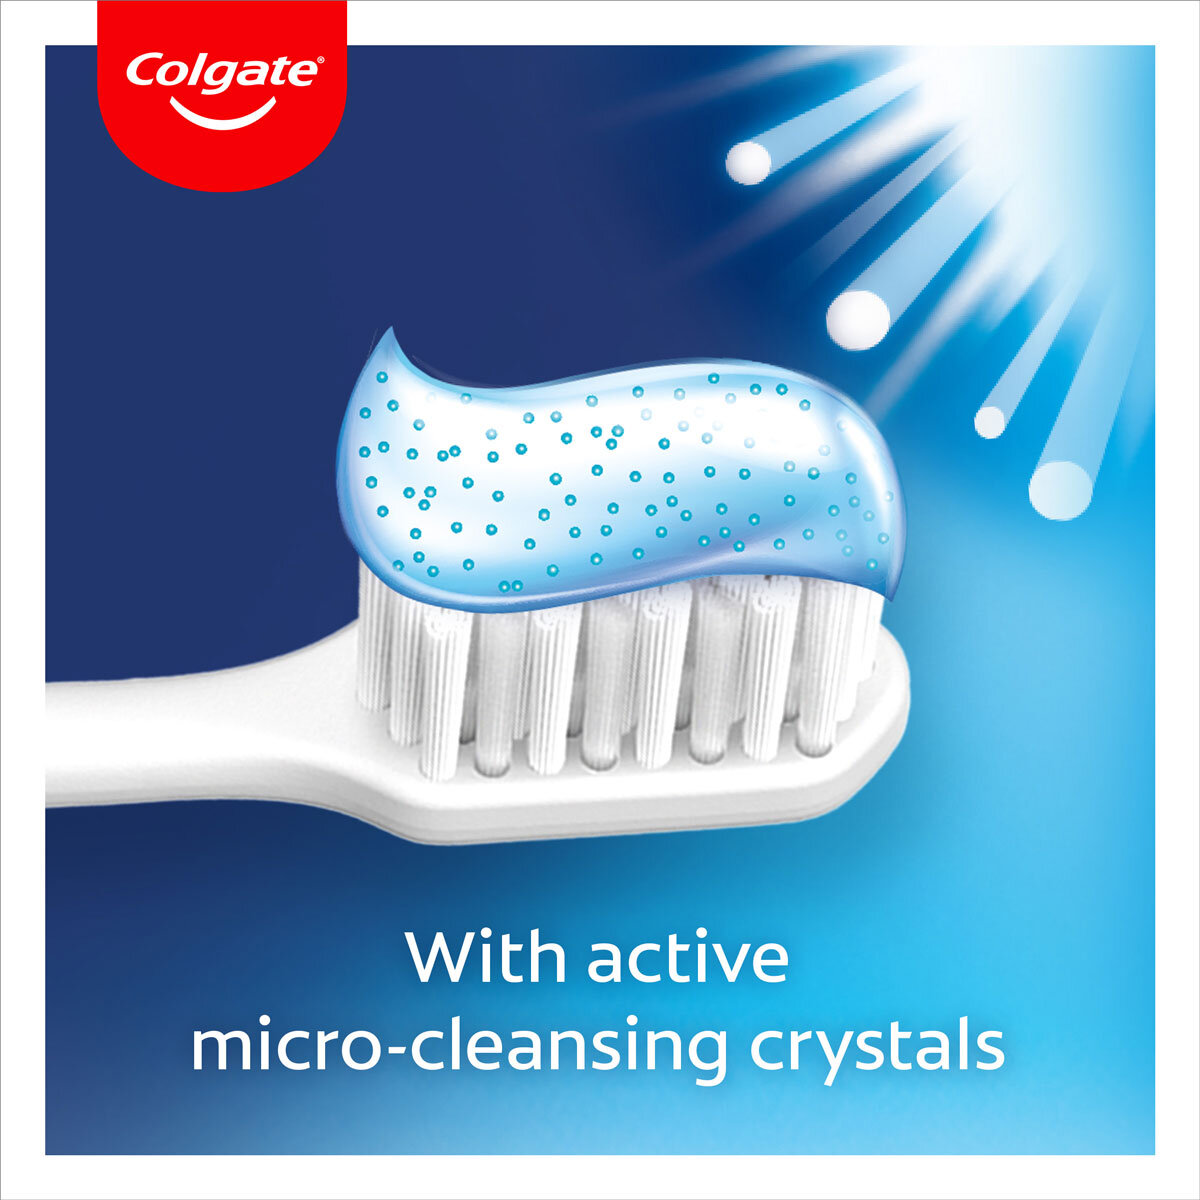 Active Micro-Cleansing Crystals